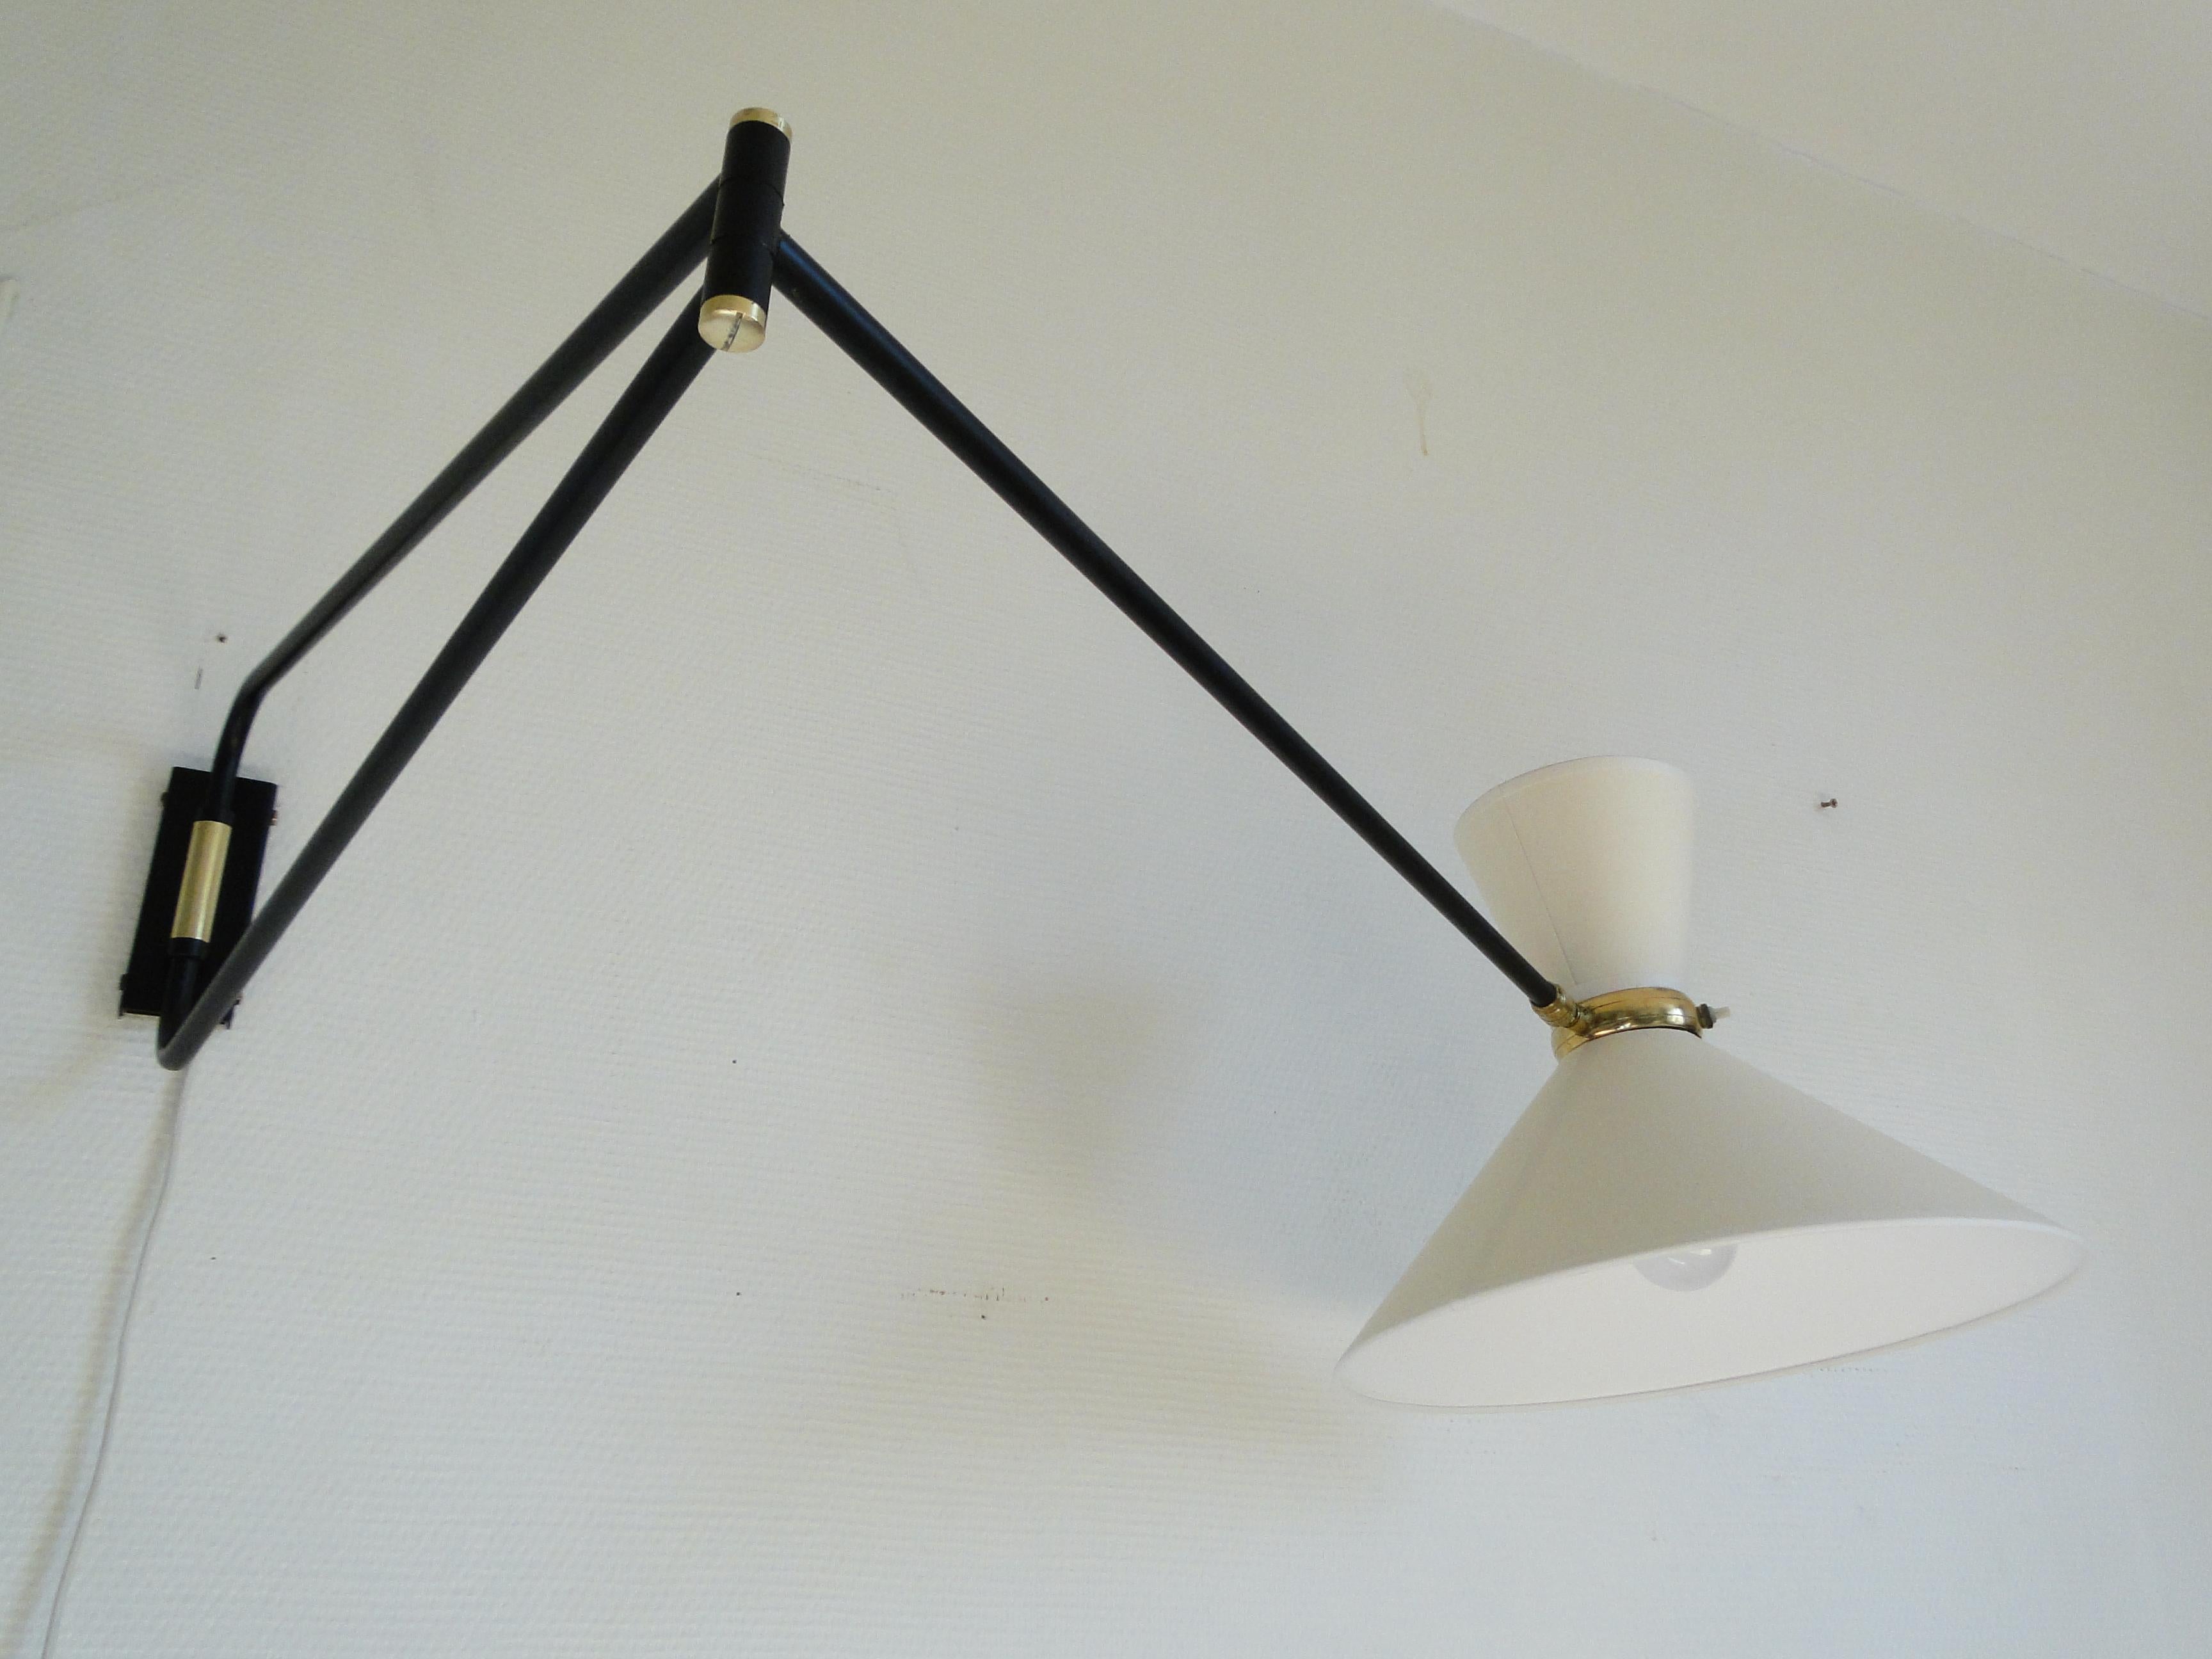 Vintage very large wall lamp by René Mathieu 1950 France.

Wall light by René Mathieu from the 1950s.

2-Arm articulated metal and brass stem.

The double bulb sconce has independent switches for the up and down lights. 

New diabolo